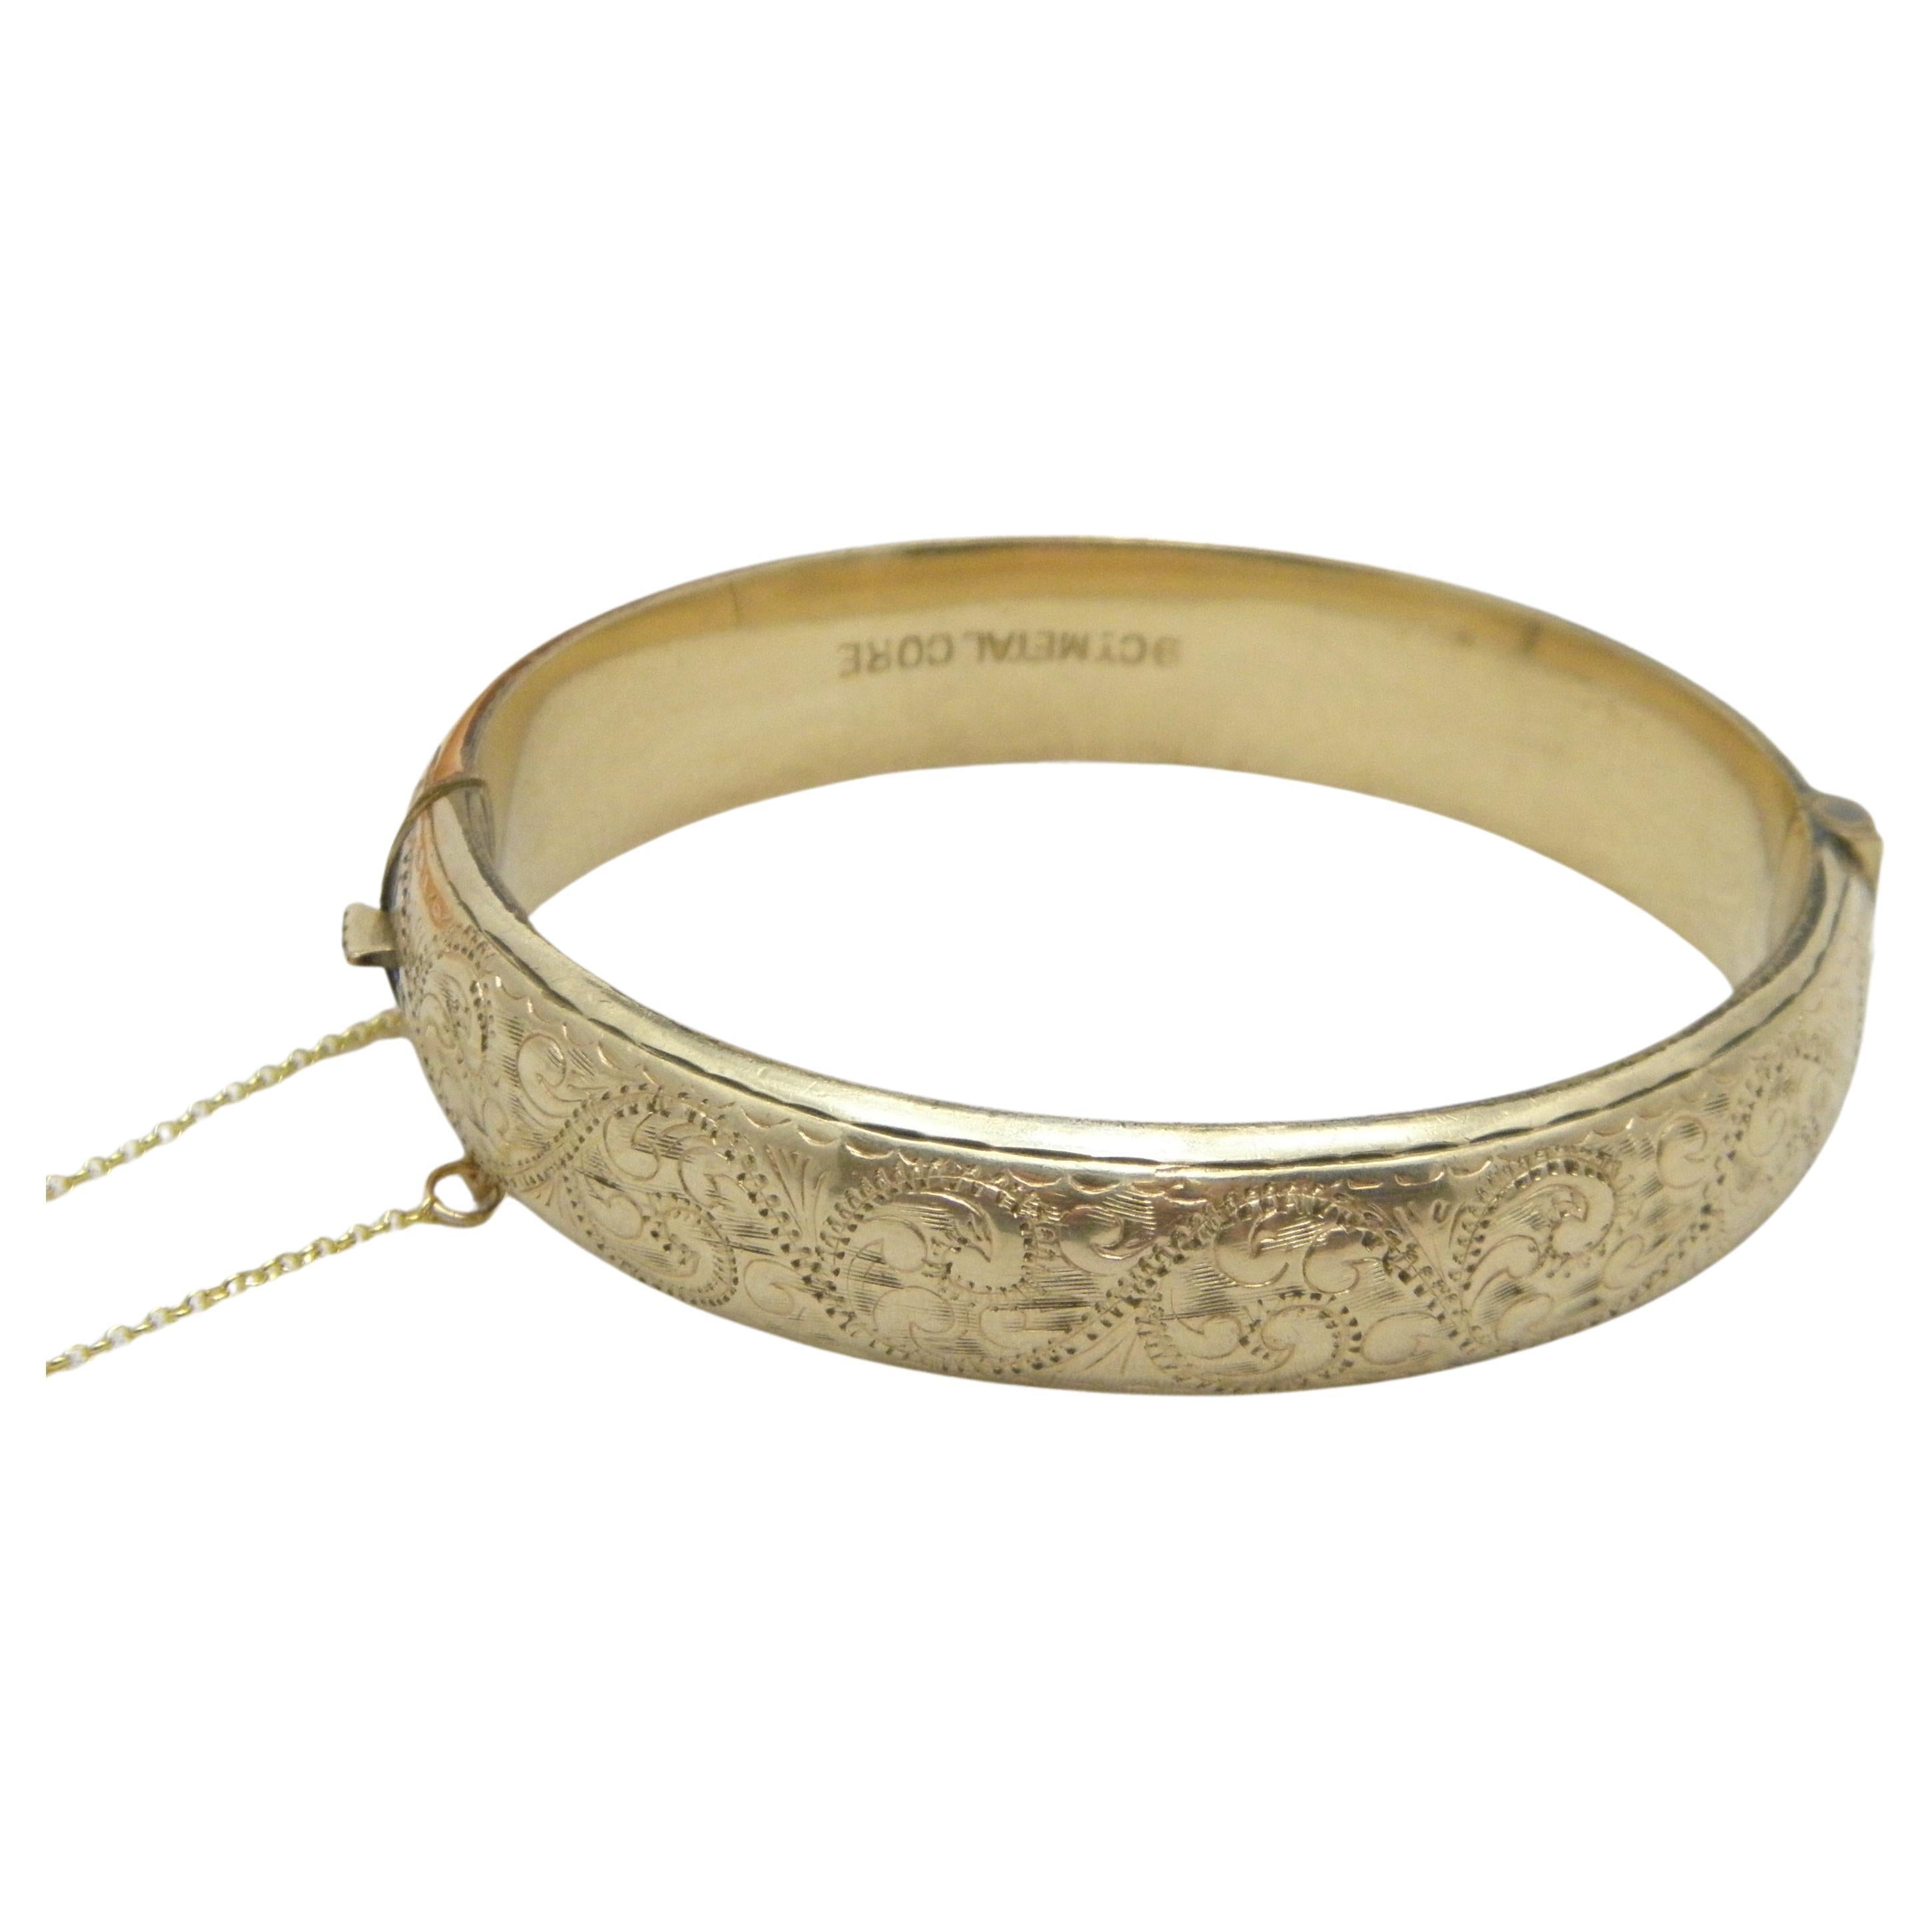 Bargain 9ct Gold 'Metal Cored' Floral Engraved Cuff Hinged Bracelet Bangle 375 For Sale